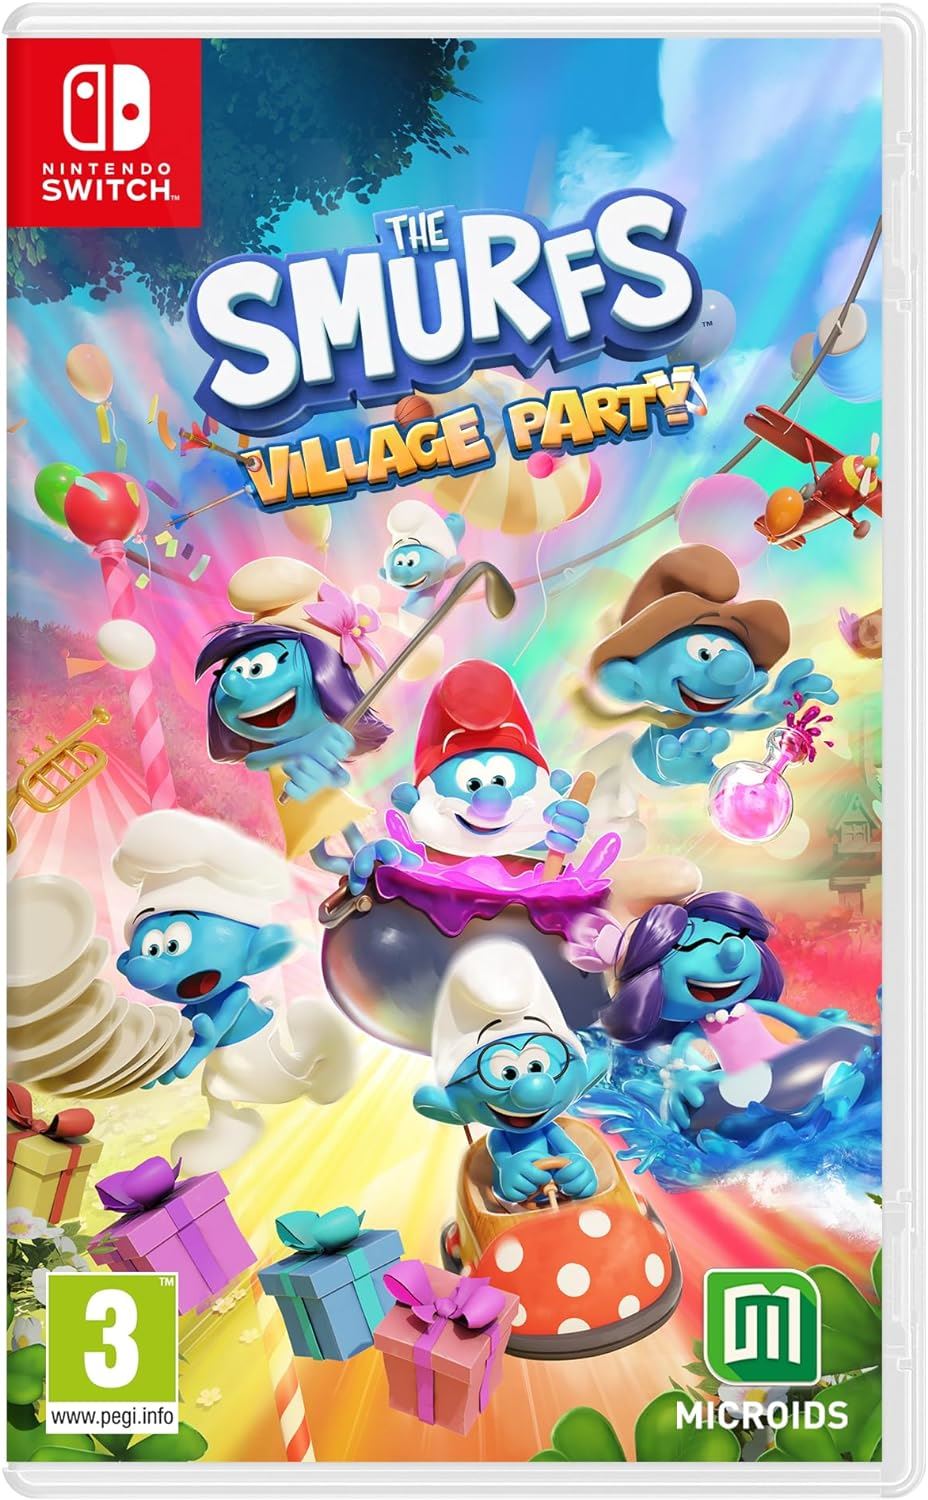 The Smurfs Village Party Nintendo Switch Game